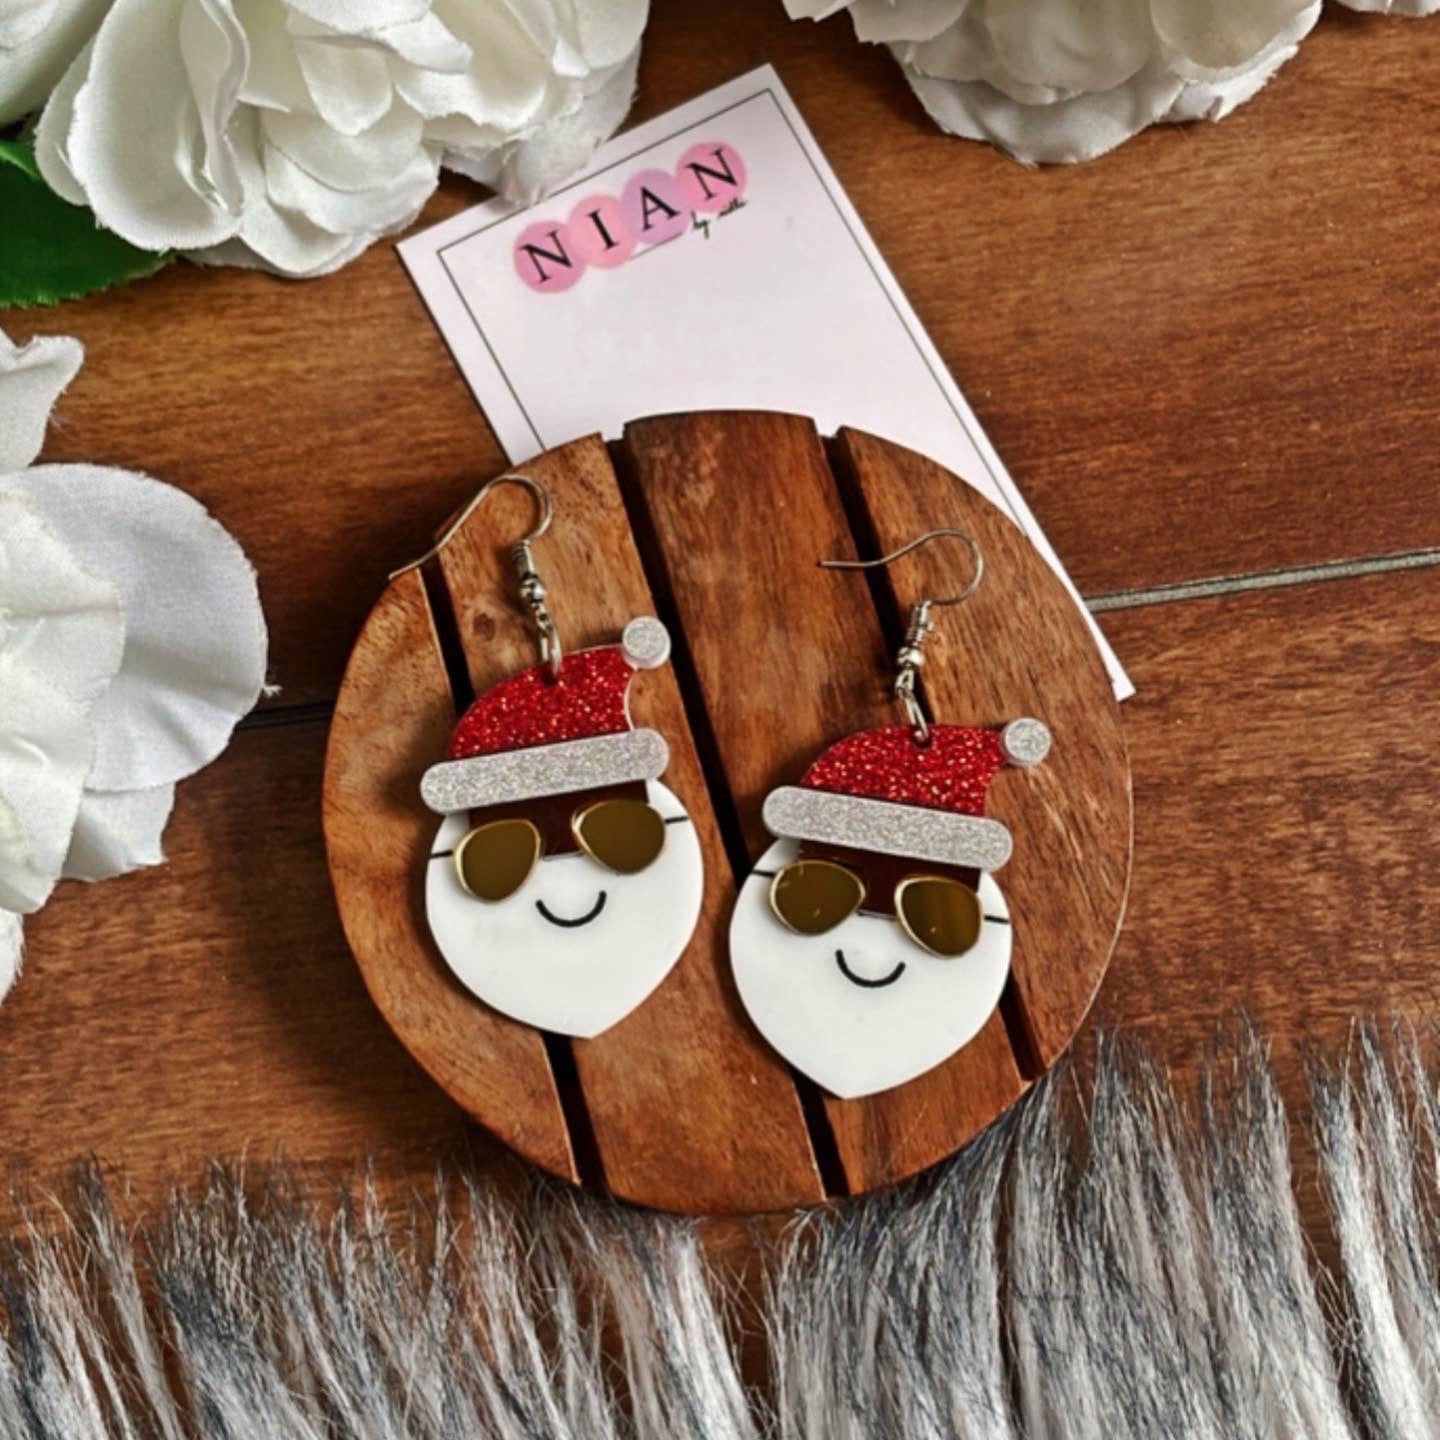 Yo Santa Earrings - Red and White - Nian by Nidhi - in a brown background